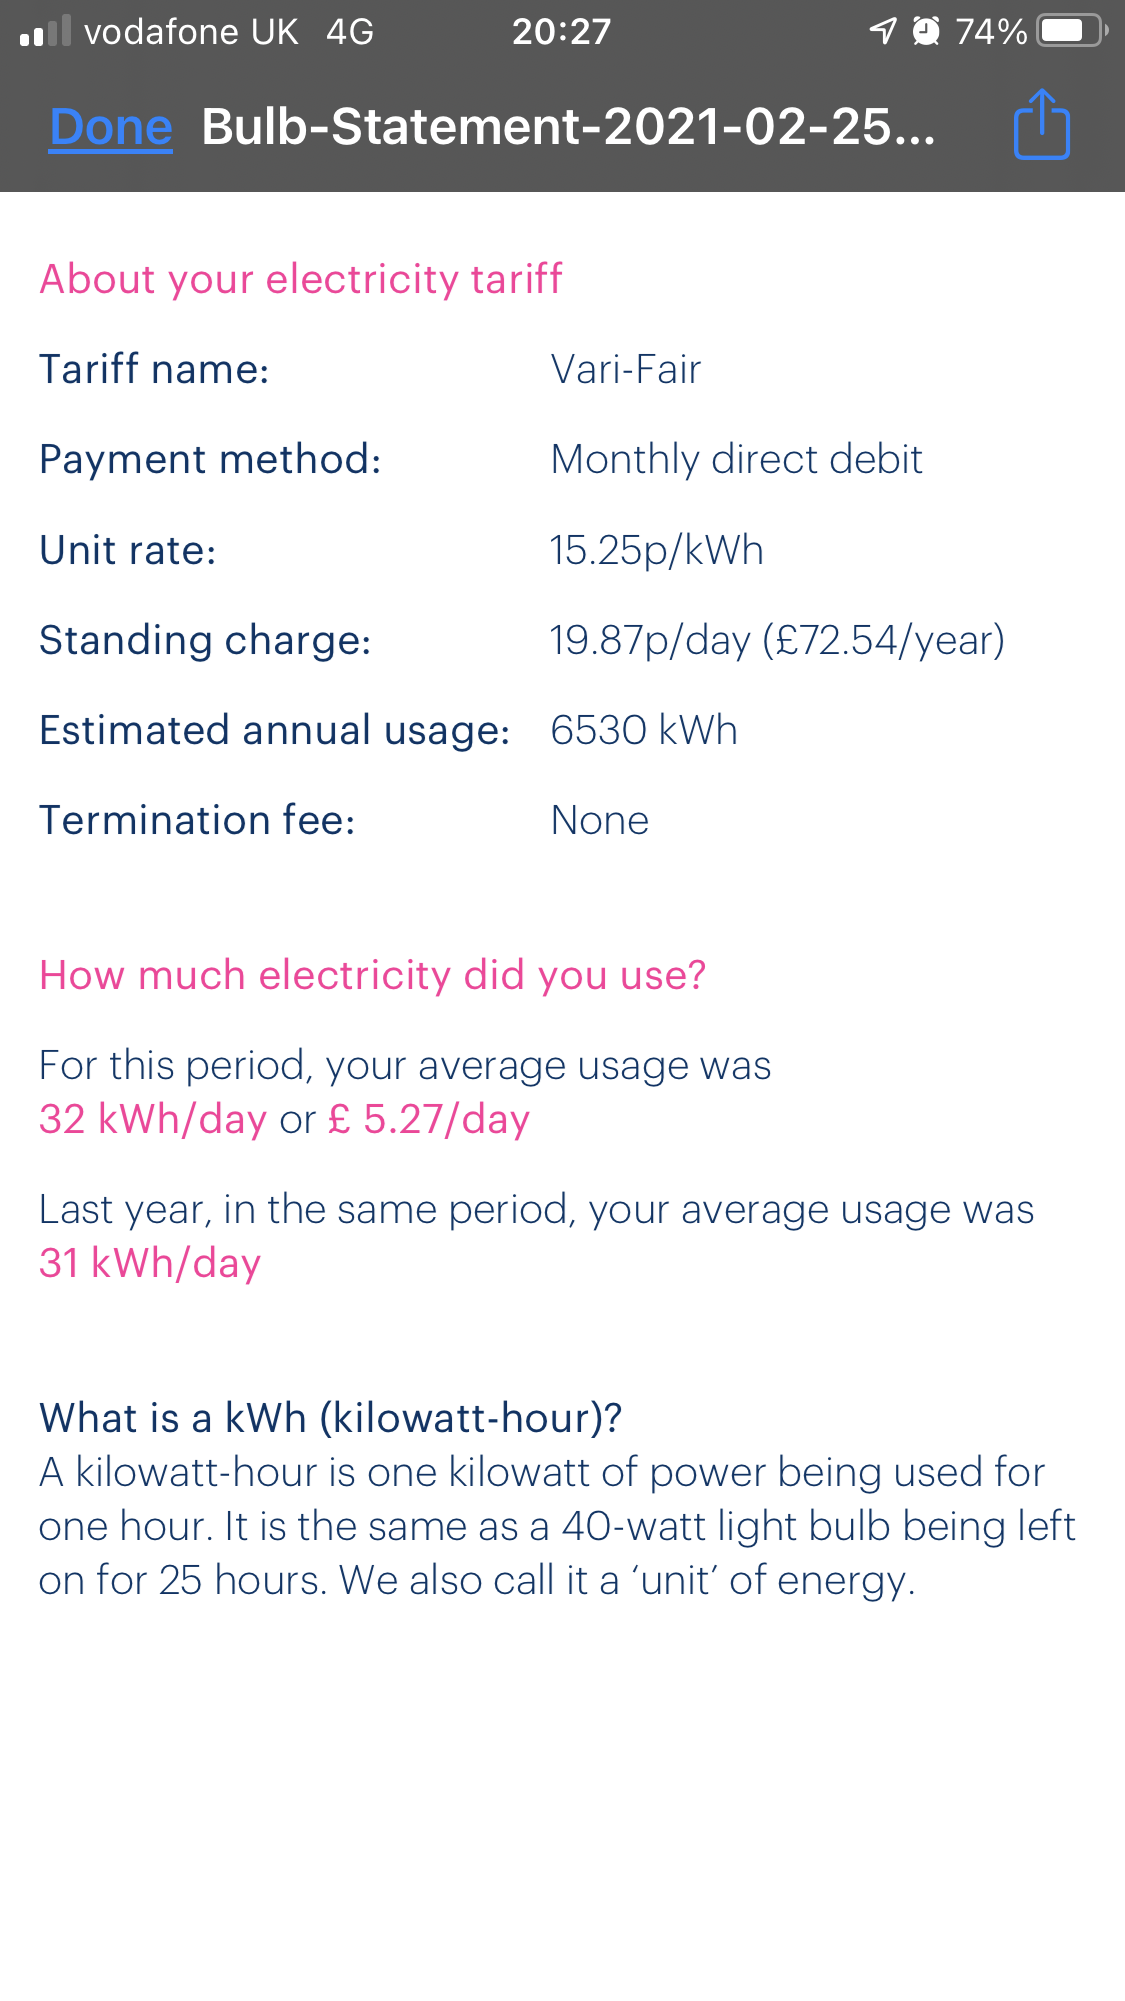 Energy price rises - what are you paying? - Page 4 - Homes, Gardens and DIY - PistonHeads UK